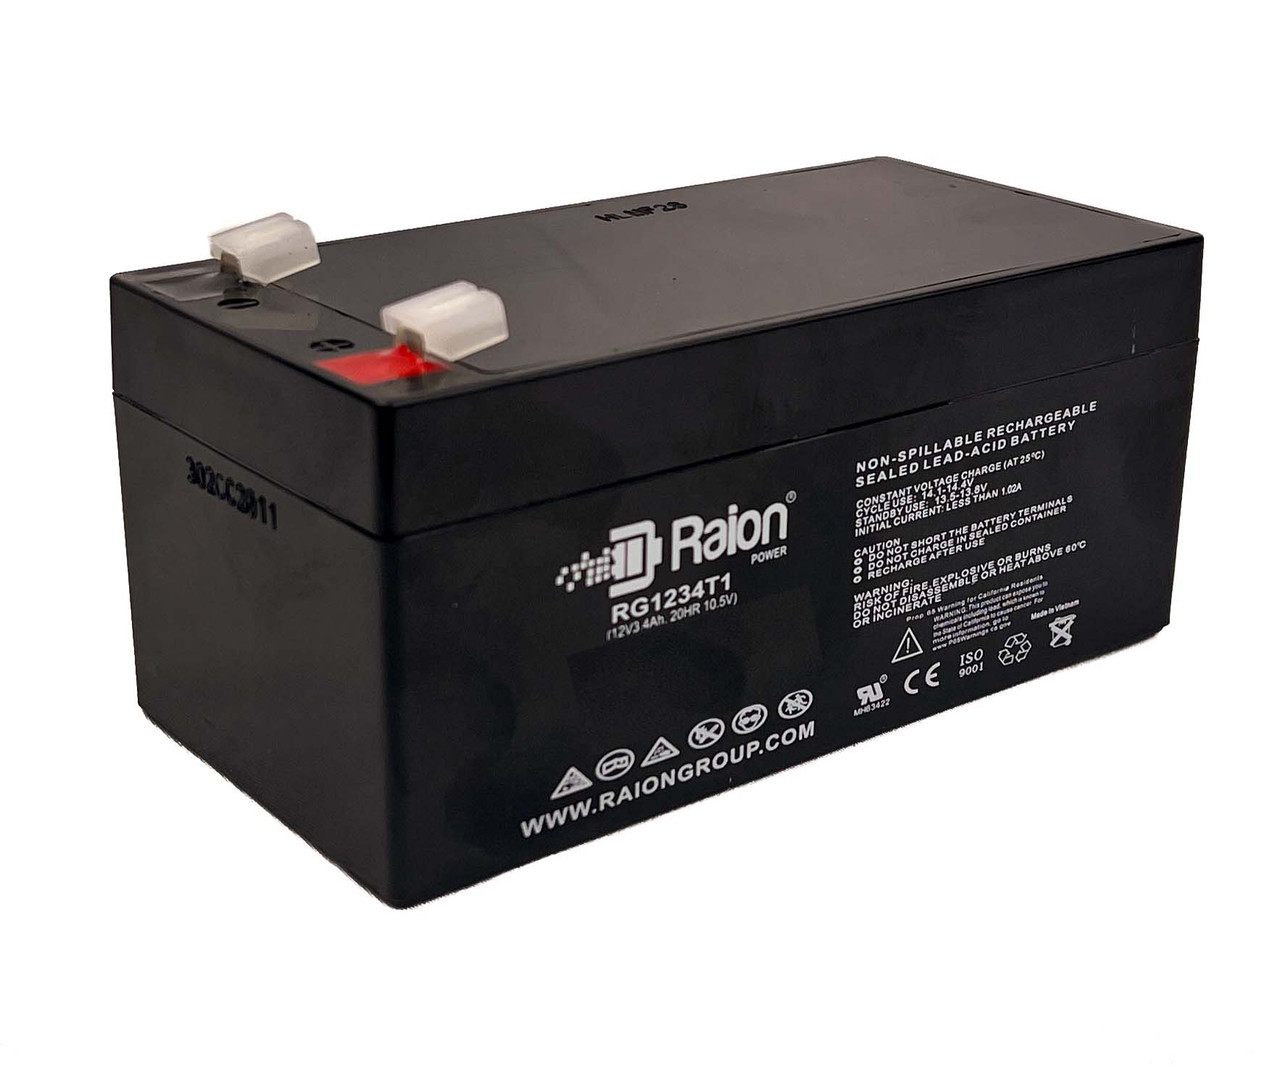 Raion Power 12V 3.4Ah Non-Spillable Replacement Battery for Bright Way Group BWG 1234